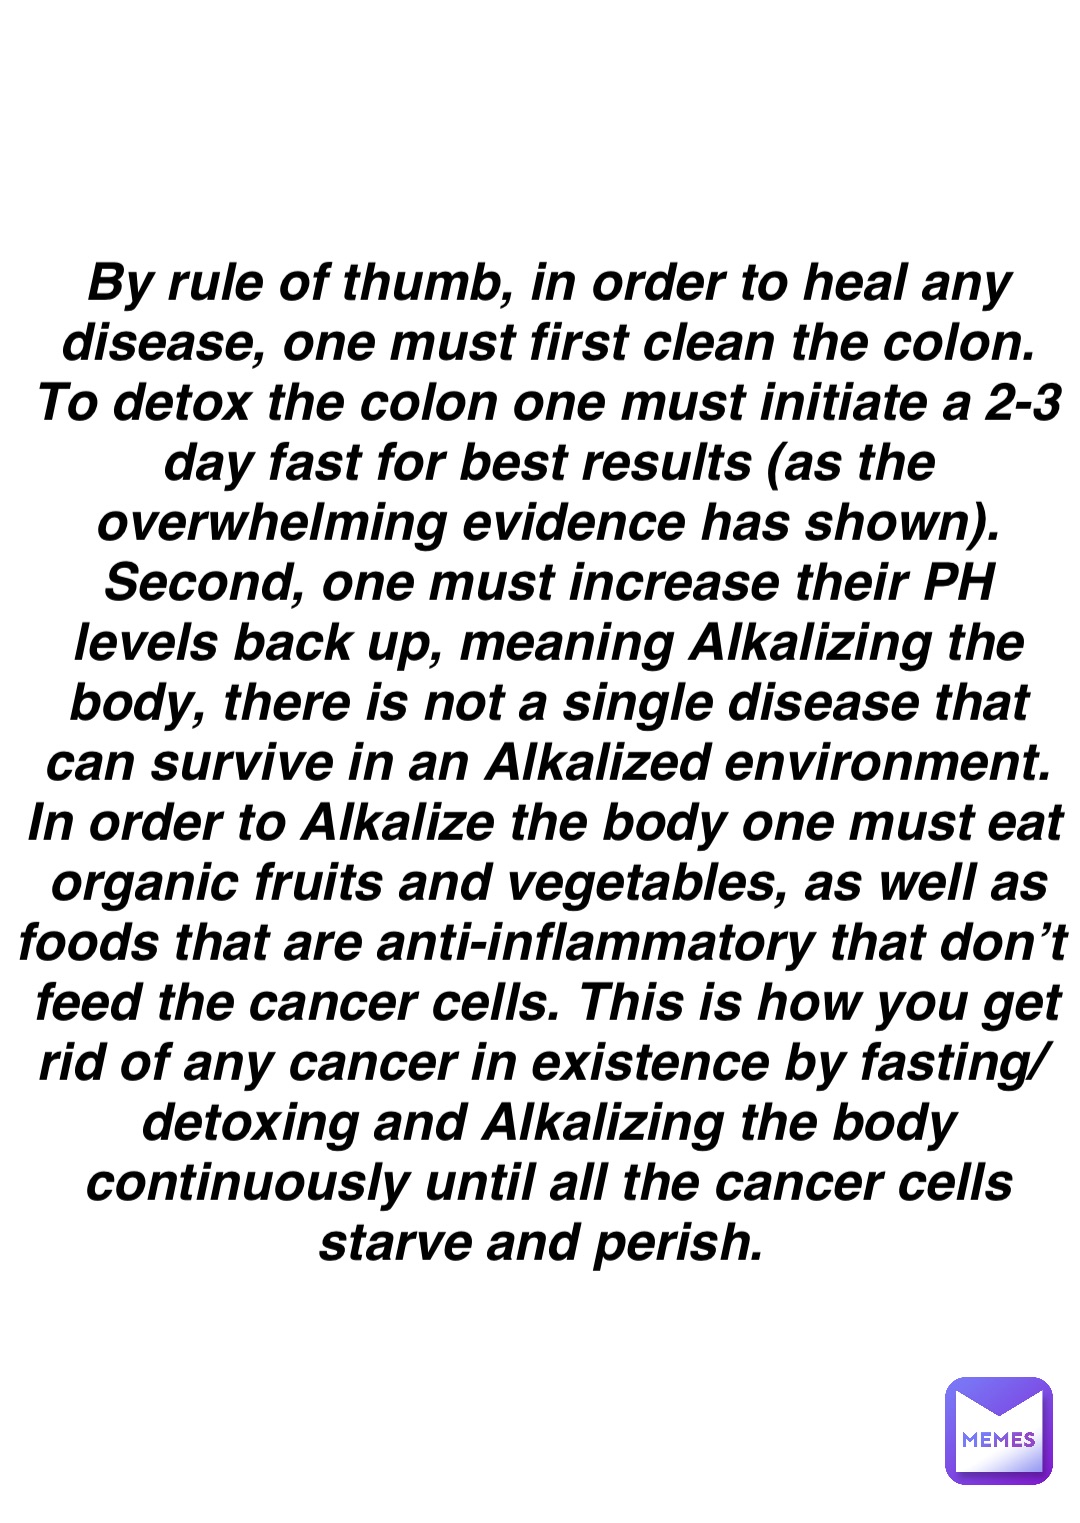 Double tap to edit By rule of thumb, in order to heal any disease, one must first clean the colon. To detox the colon one must initiate a 2-3 day fast for best results (as the overwhelming evidence has shown). Second, one must increase their PH levels back up, meaning Alkalizing the body, there is not a single disease that can survive in an Alkalized environment. In order to Alkalize the body one must eat organic fruits and vegetables, as well as foods that are anti-inflammatory that don’t feed the cancer cells. This is how you get rid of any cancer in existence by fasting/detoxing and Alkalizing the body continuously until all the cancer cells starve and perish.